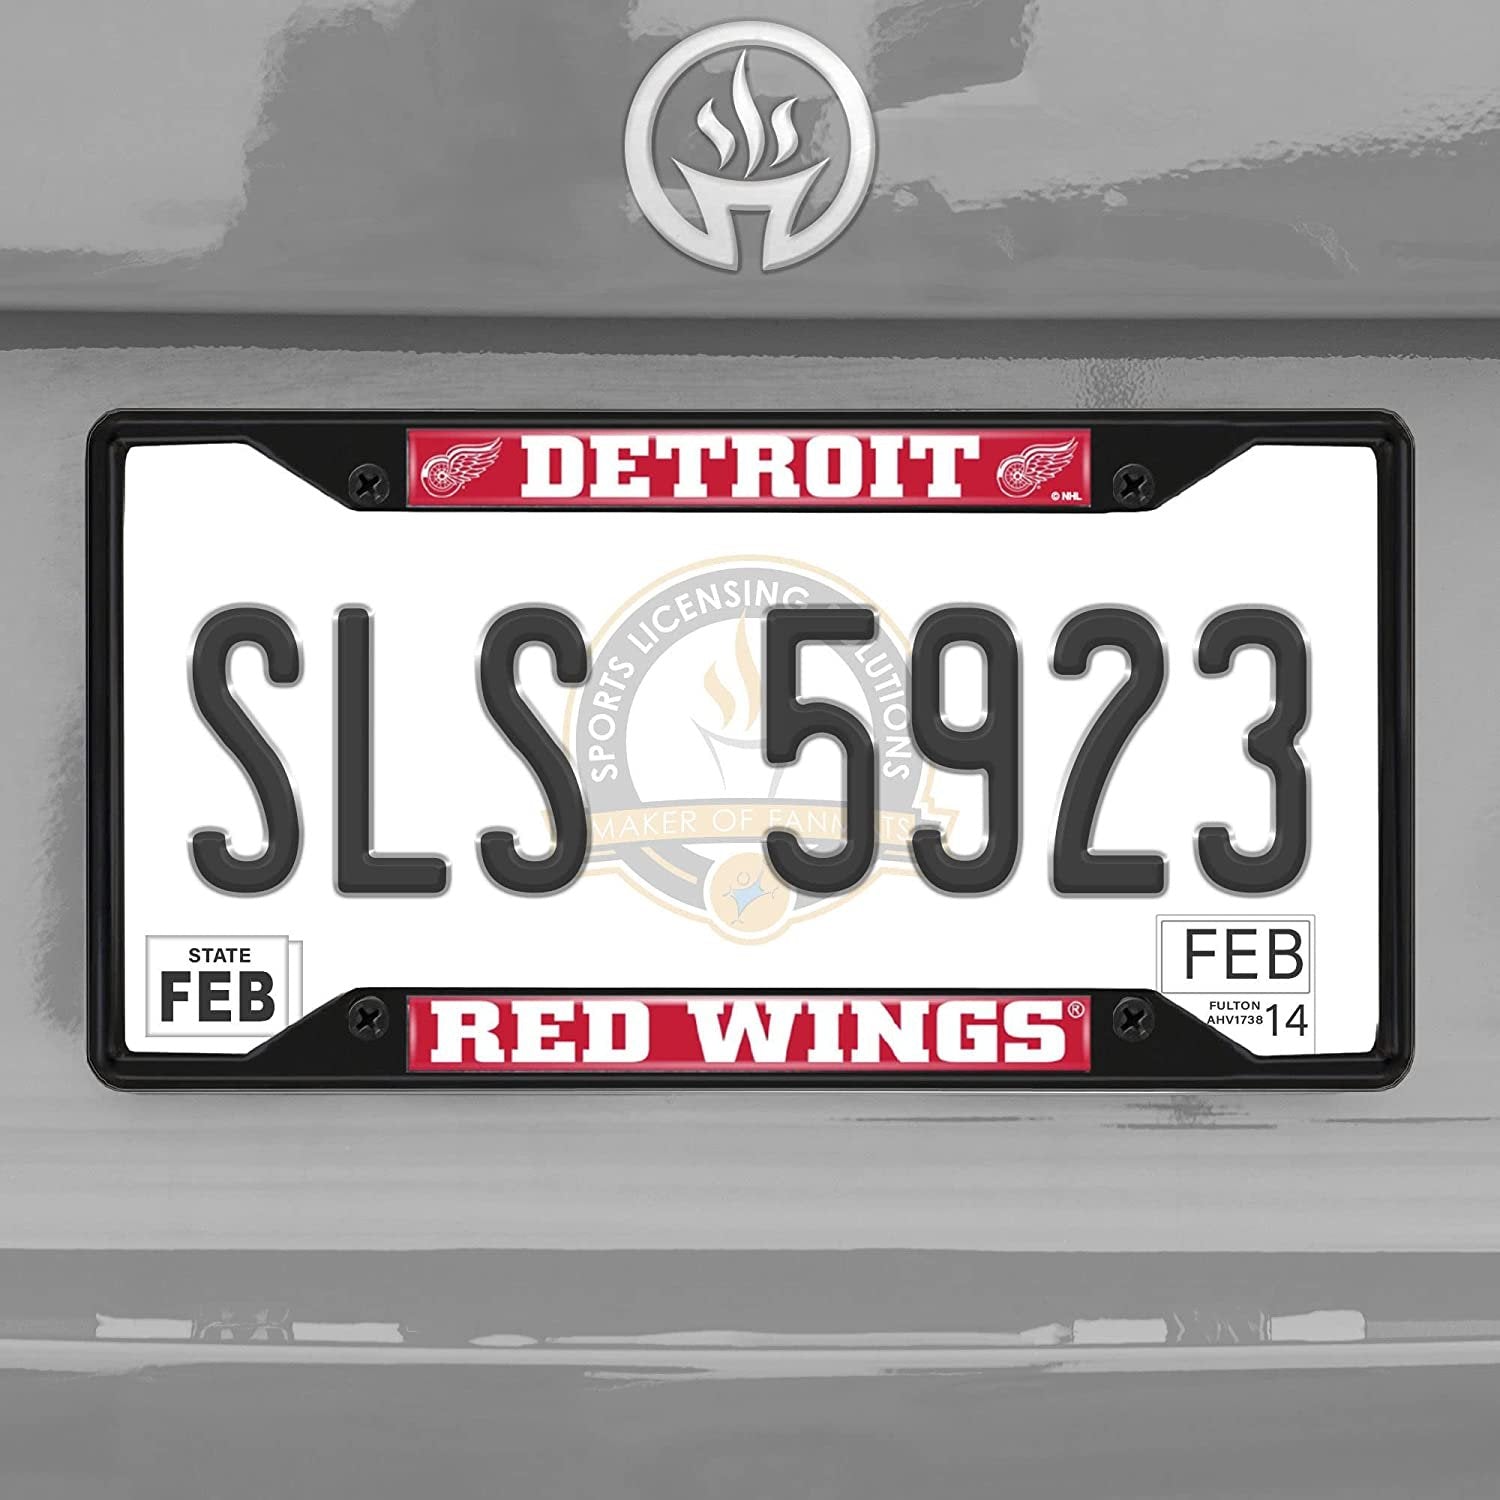 Detroit Red Wings Black Metal License Plate Frame Tag Cover, 6x12 Inch